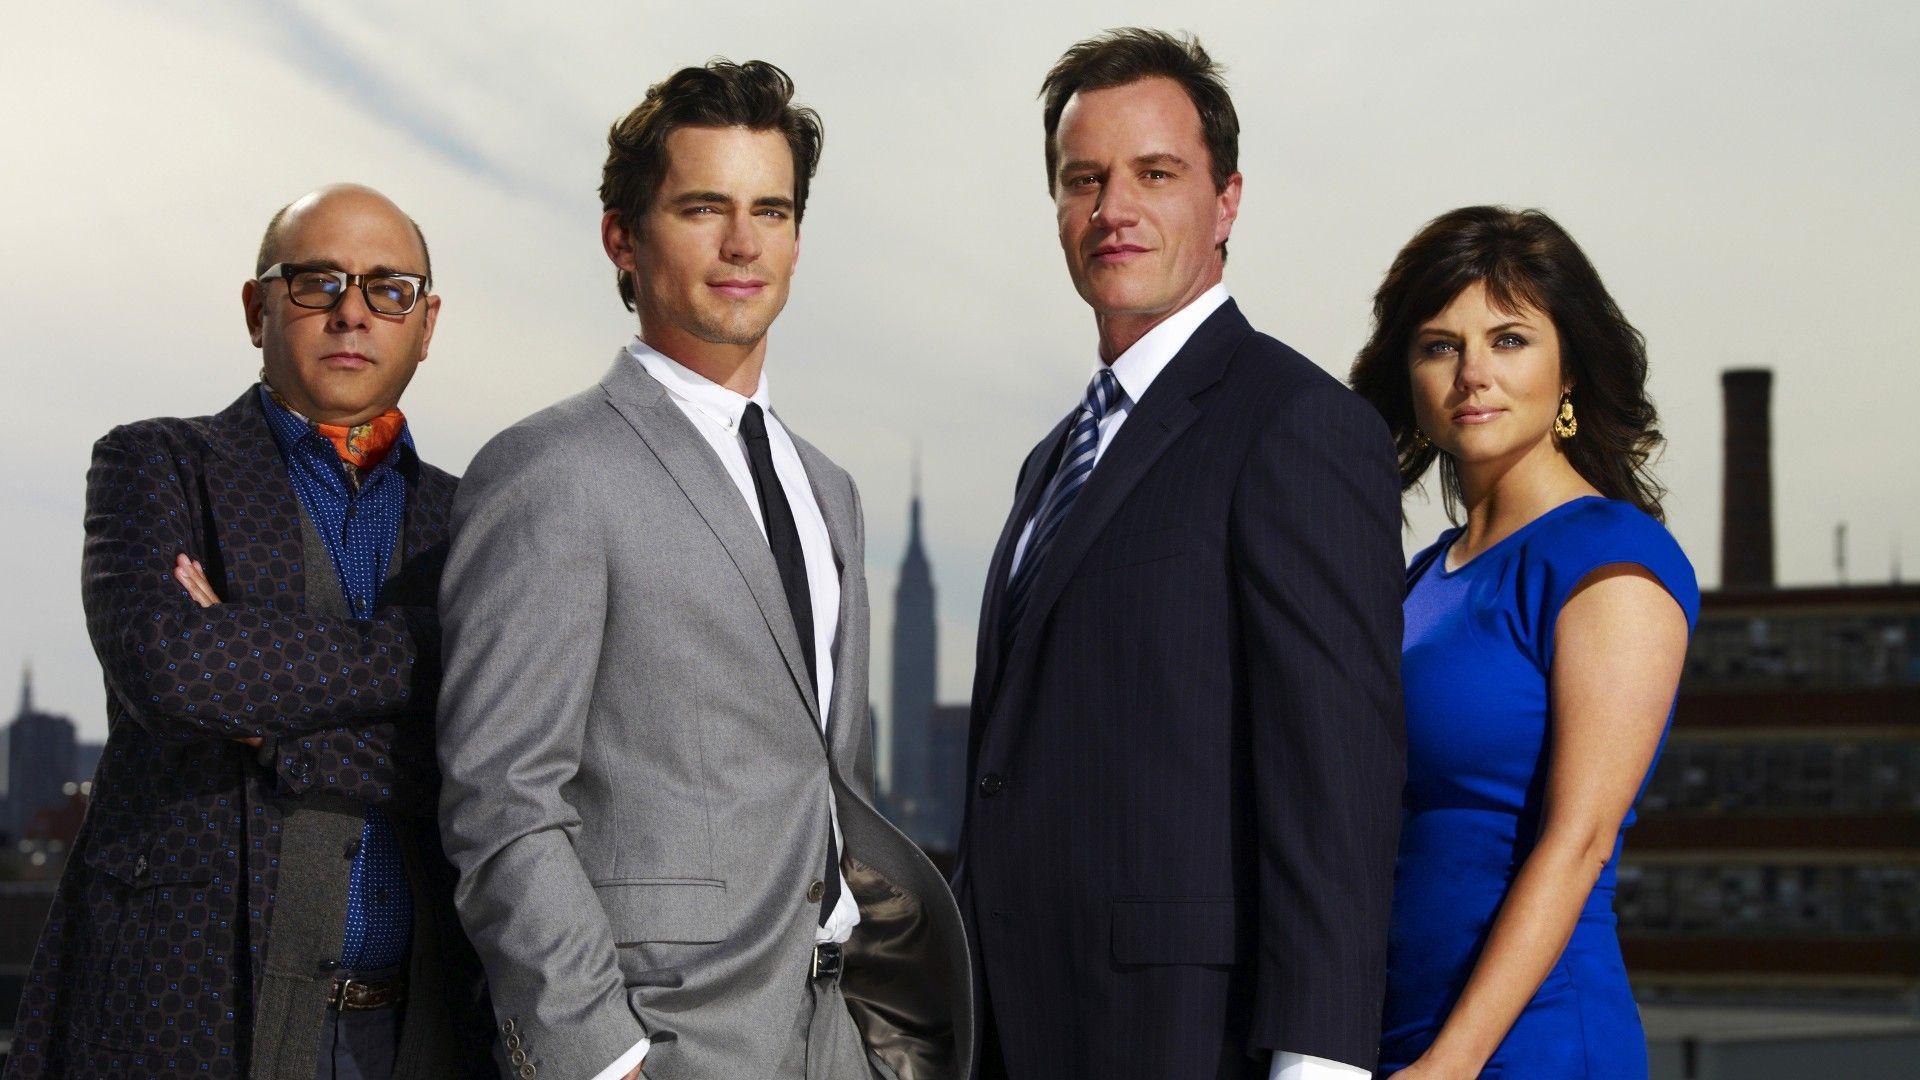 10+ White Collar HD Wallpapers and Backgrounds